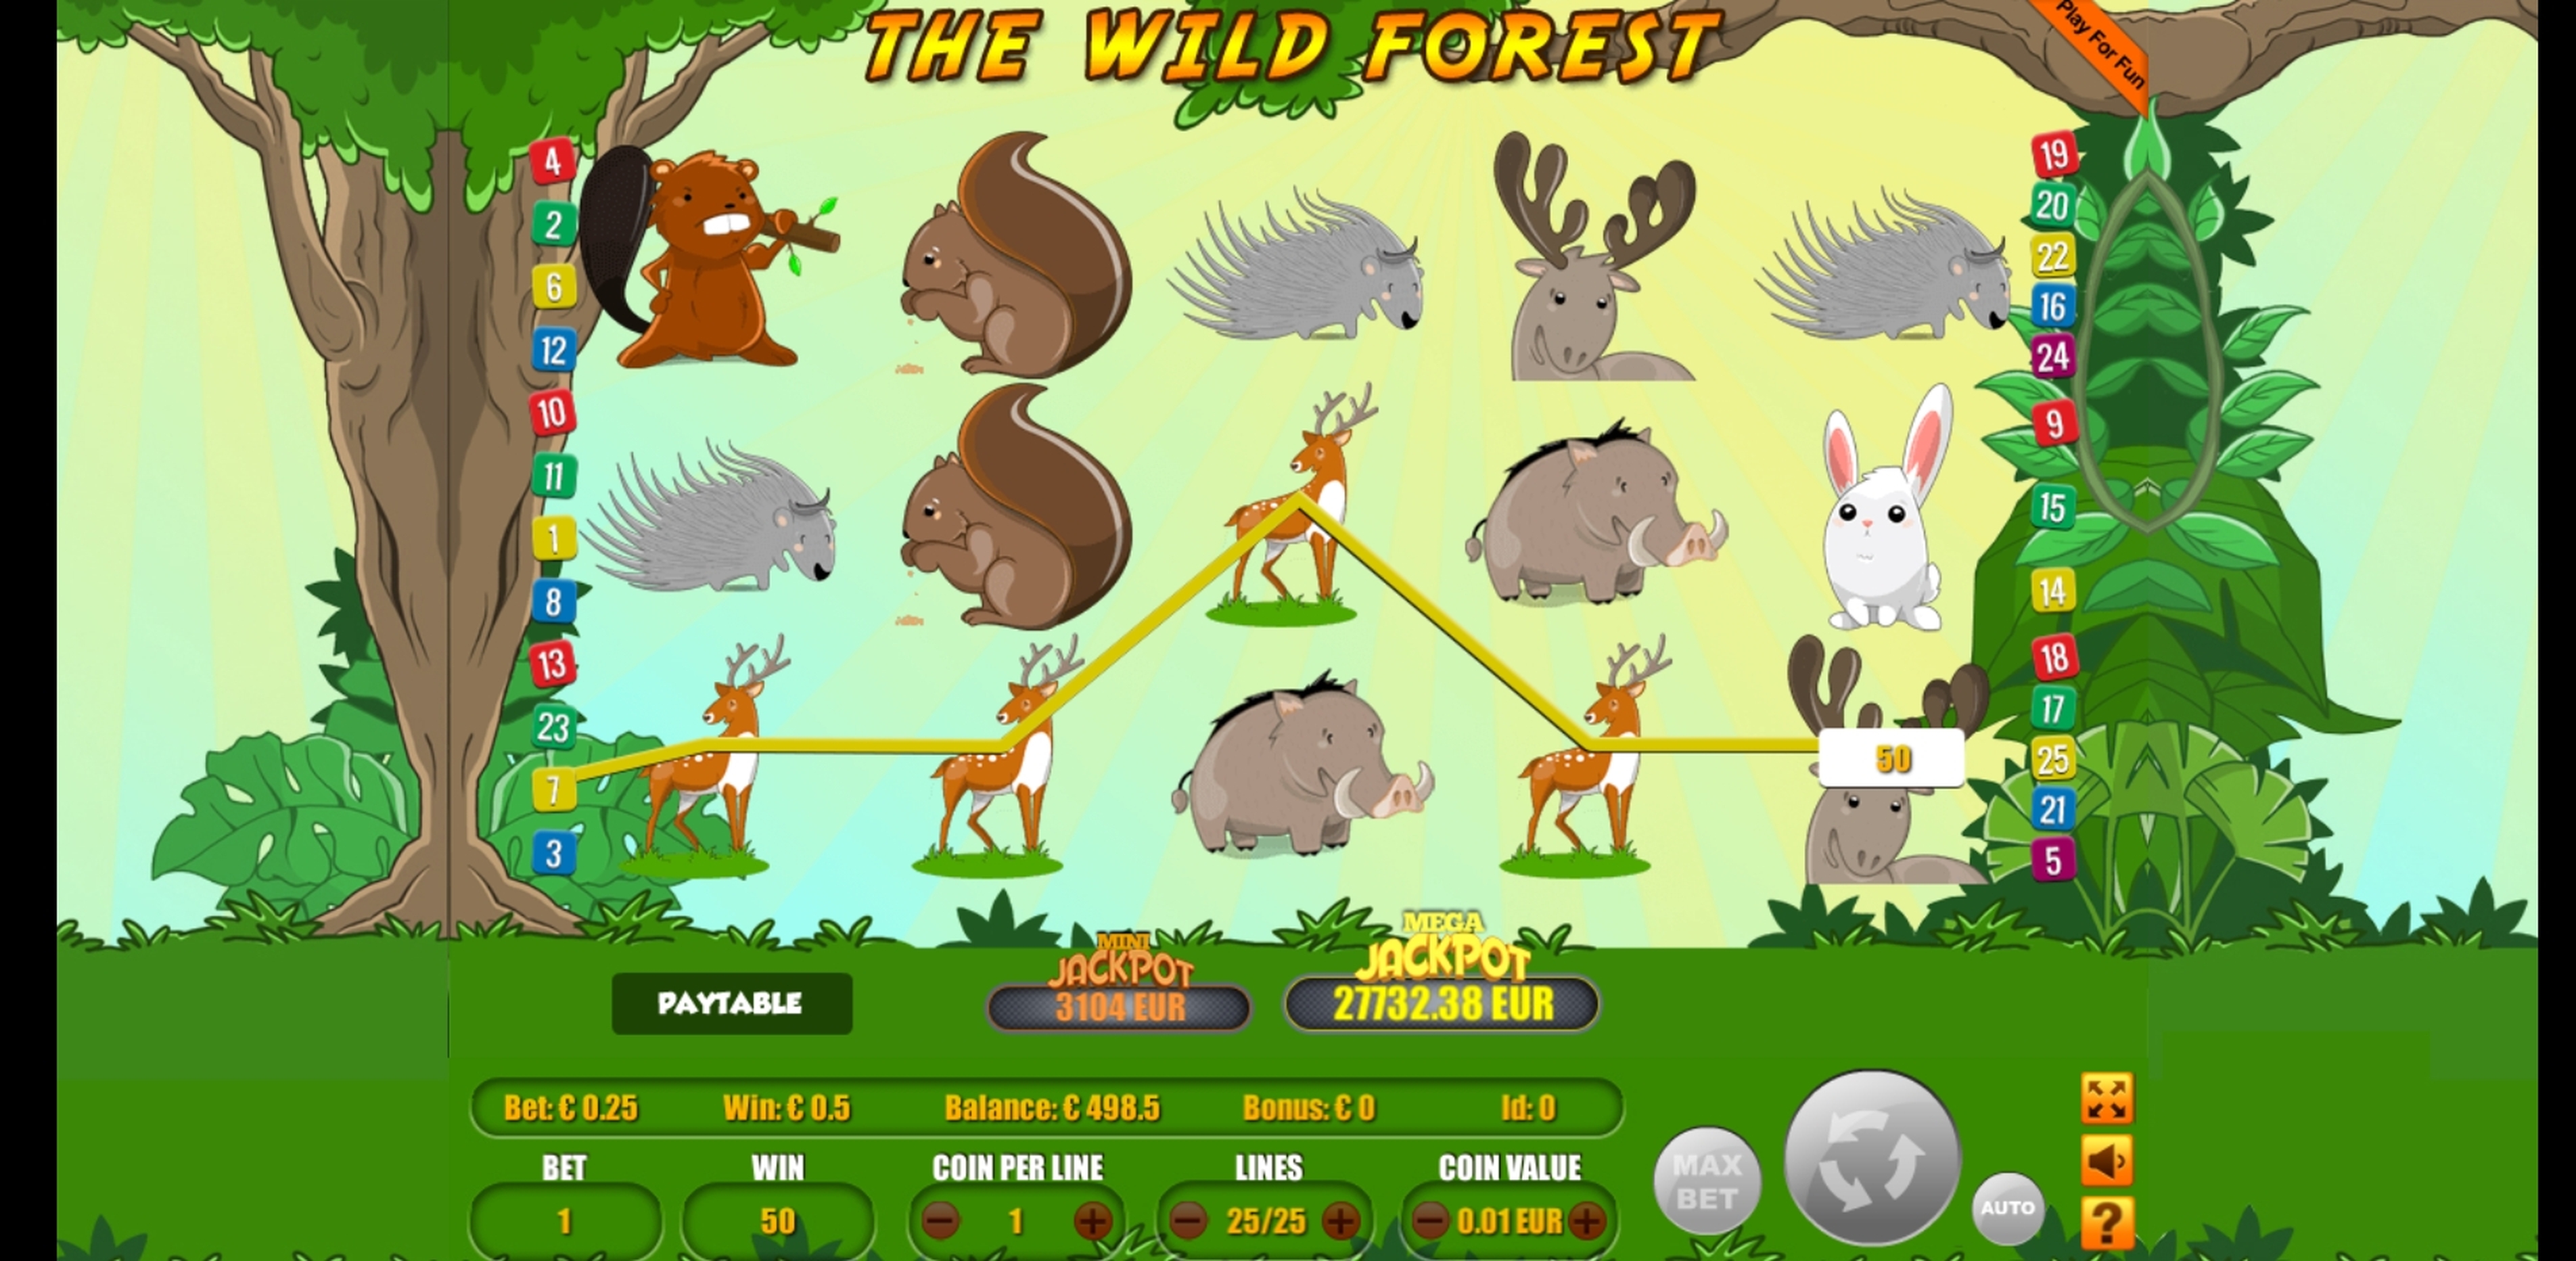 Win Money in The Wild Forest Free Slot Game by Portomaso Gaming